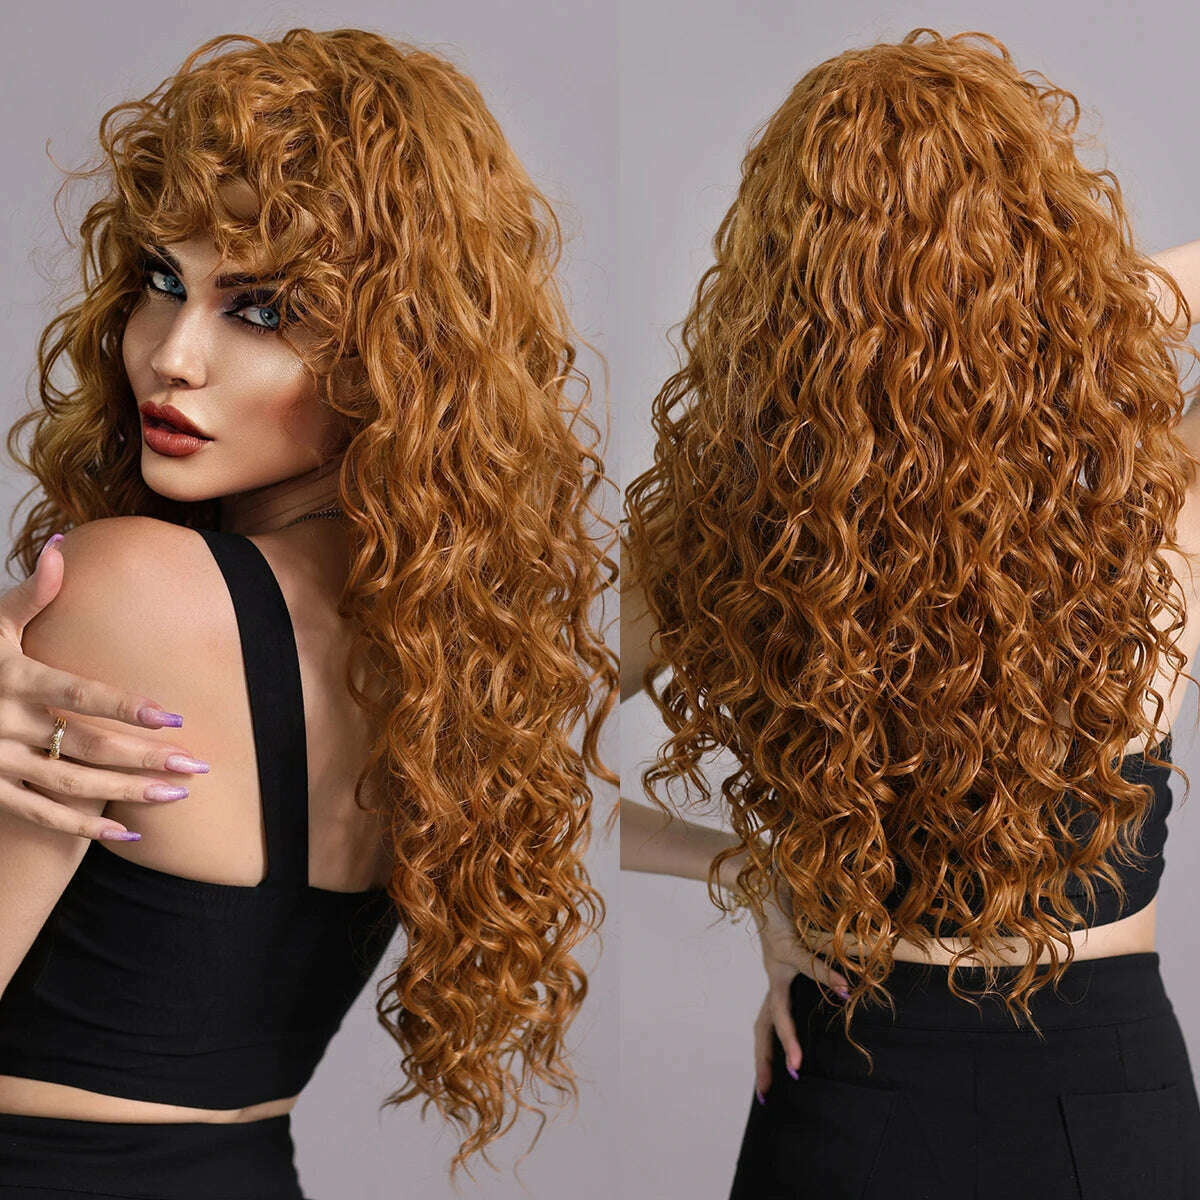 KIMLUD, NAMM Long Wavy Ombre Blonde Wigs for Women Cosplay Daily Party Synthetic Light Orange Hair Wig Lolita Heat Resistant Fiber, MW9054-1 / Follow us - 2USD, KIMLUD Womens Clothes